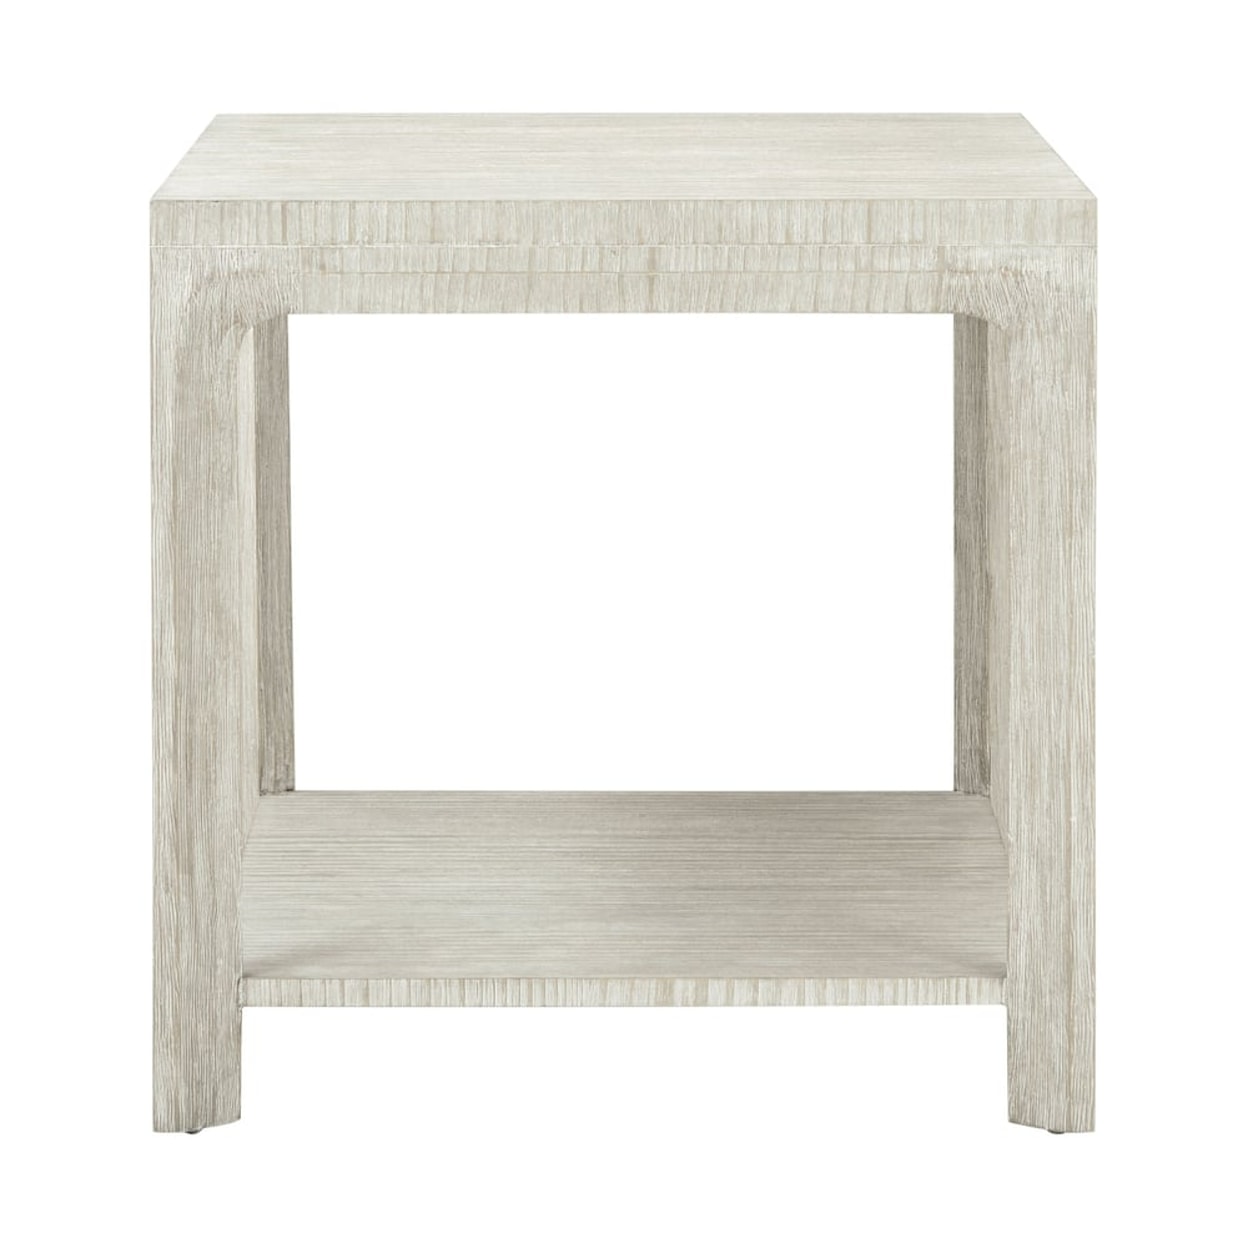 Theodore Alexander Breeze Side Table with Shelving